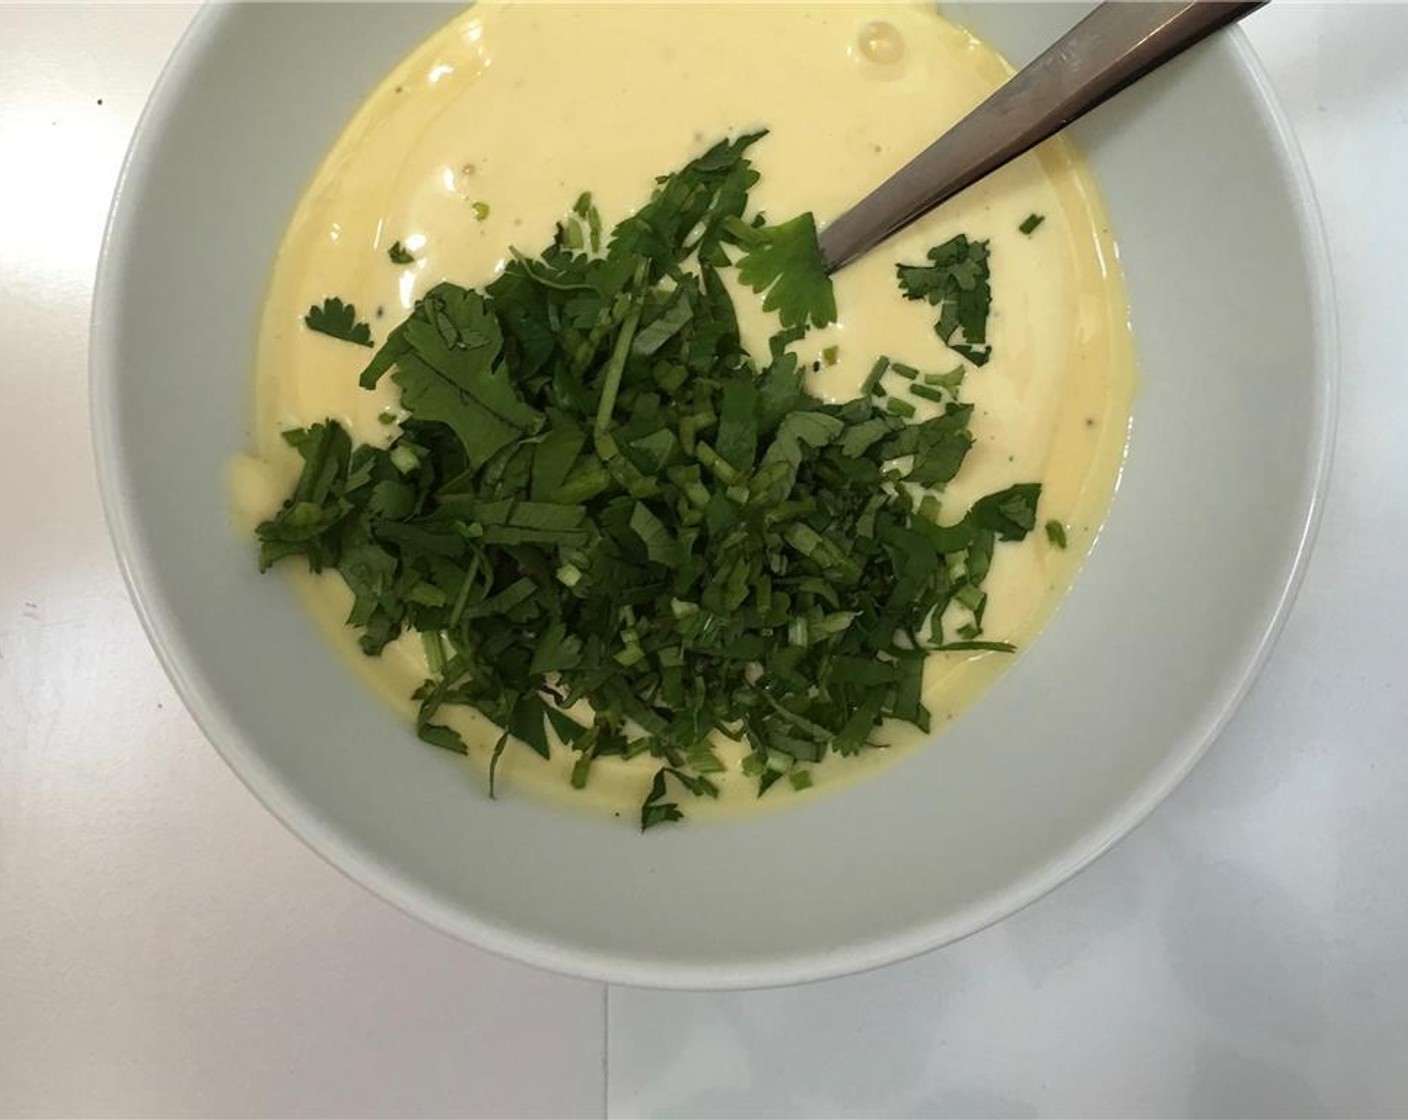 step 1 For the cilantro mayonnaise, combine the Mayonnaise (2 Tbsp), the juice from Lemon (1) and the Fresh Cilantro (3 Tbsp) Season with Salt (to taste) and Ground Black Pepper (to taste). Stir well and place the mayo in the fridge until needed later on.